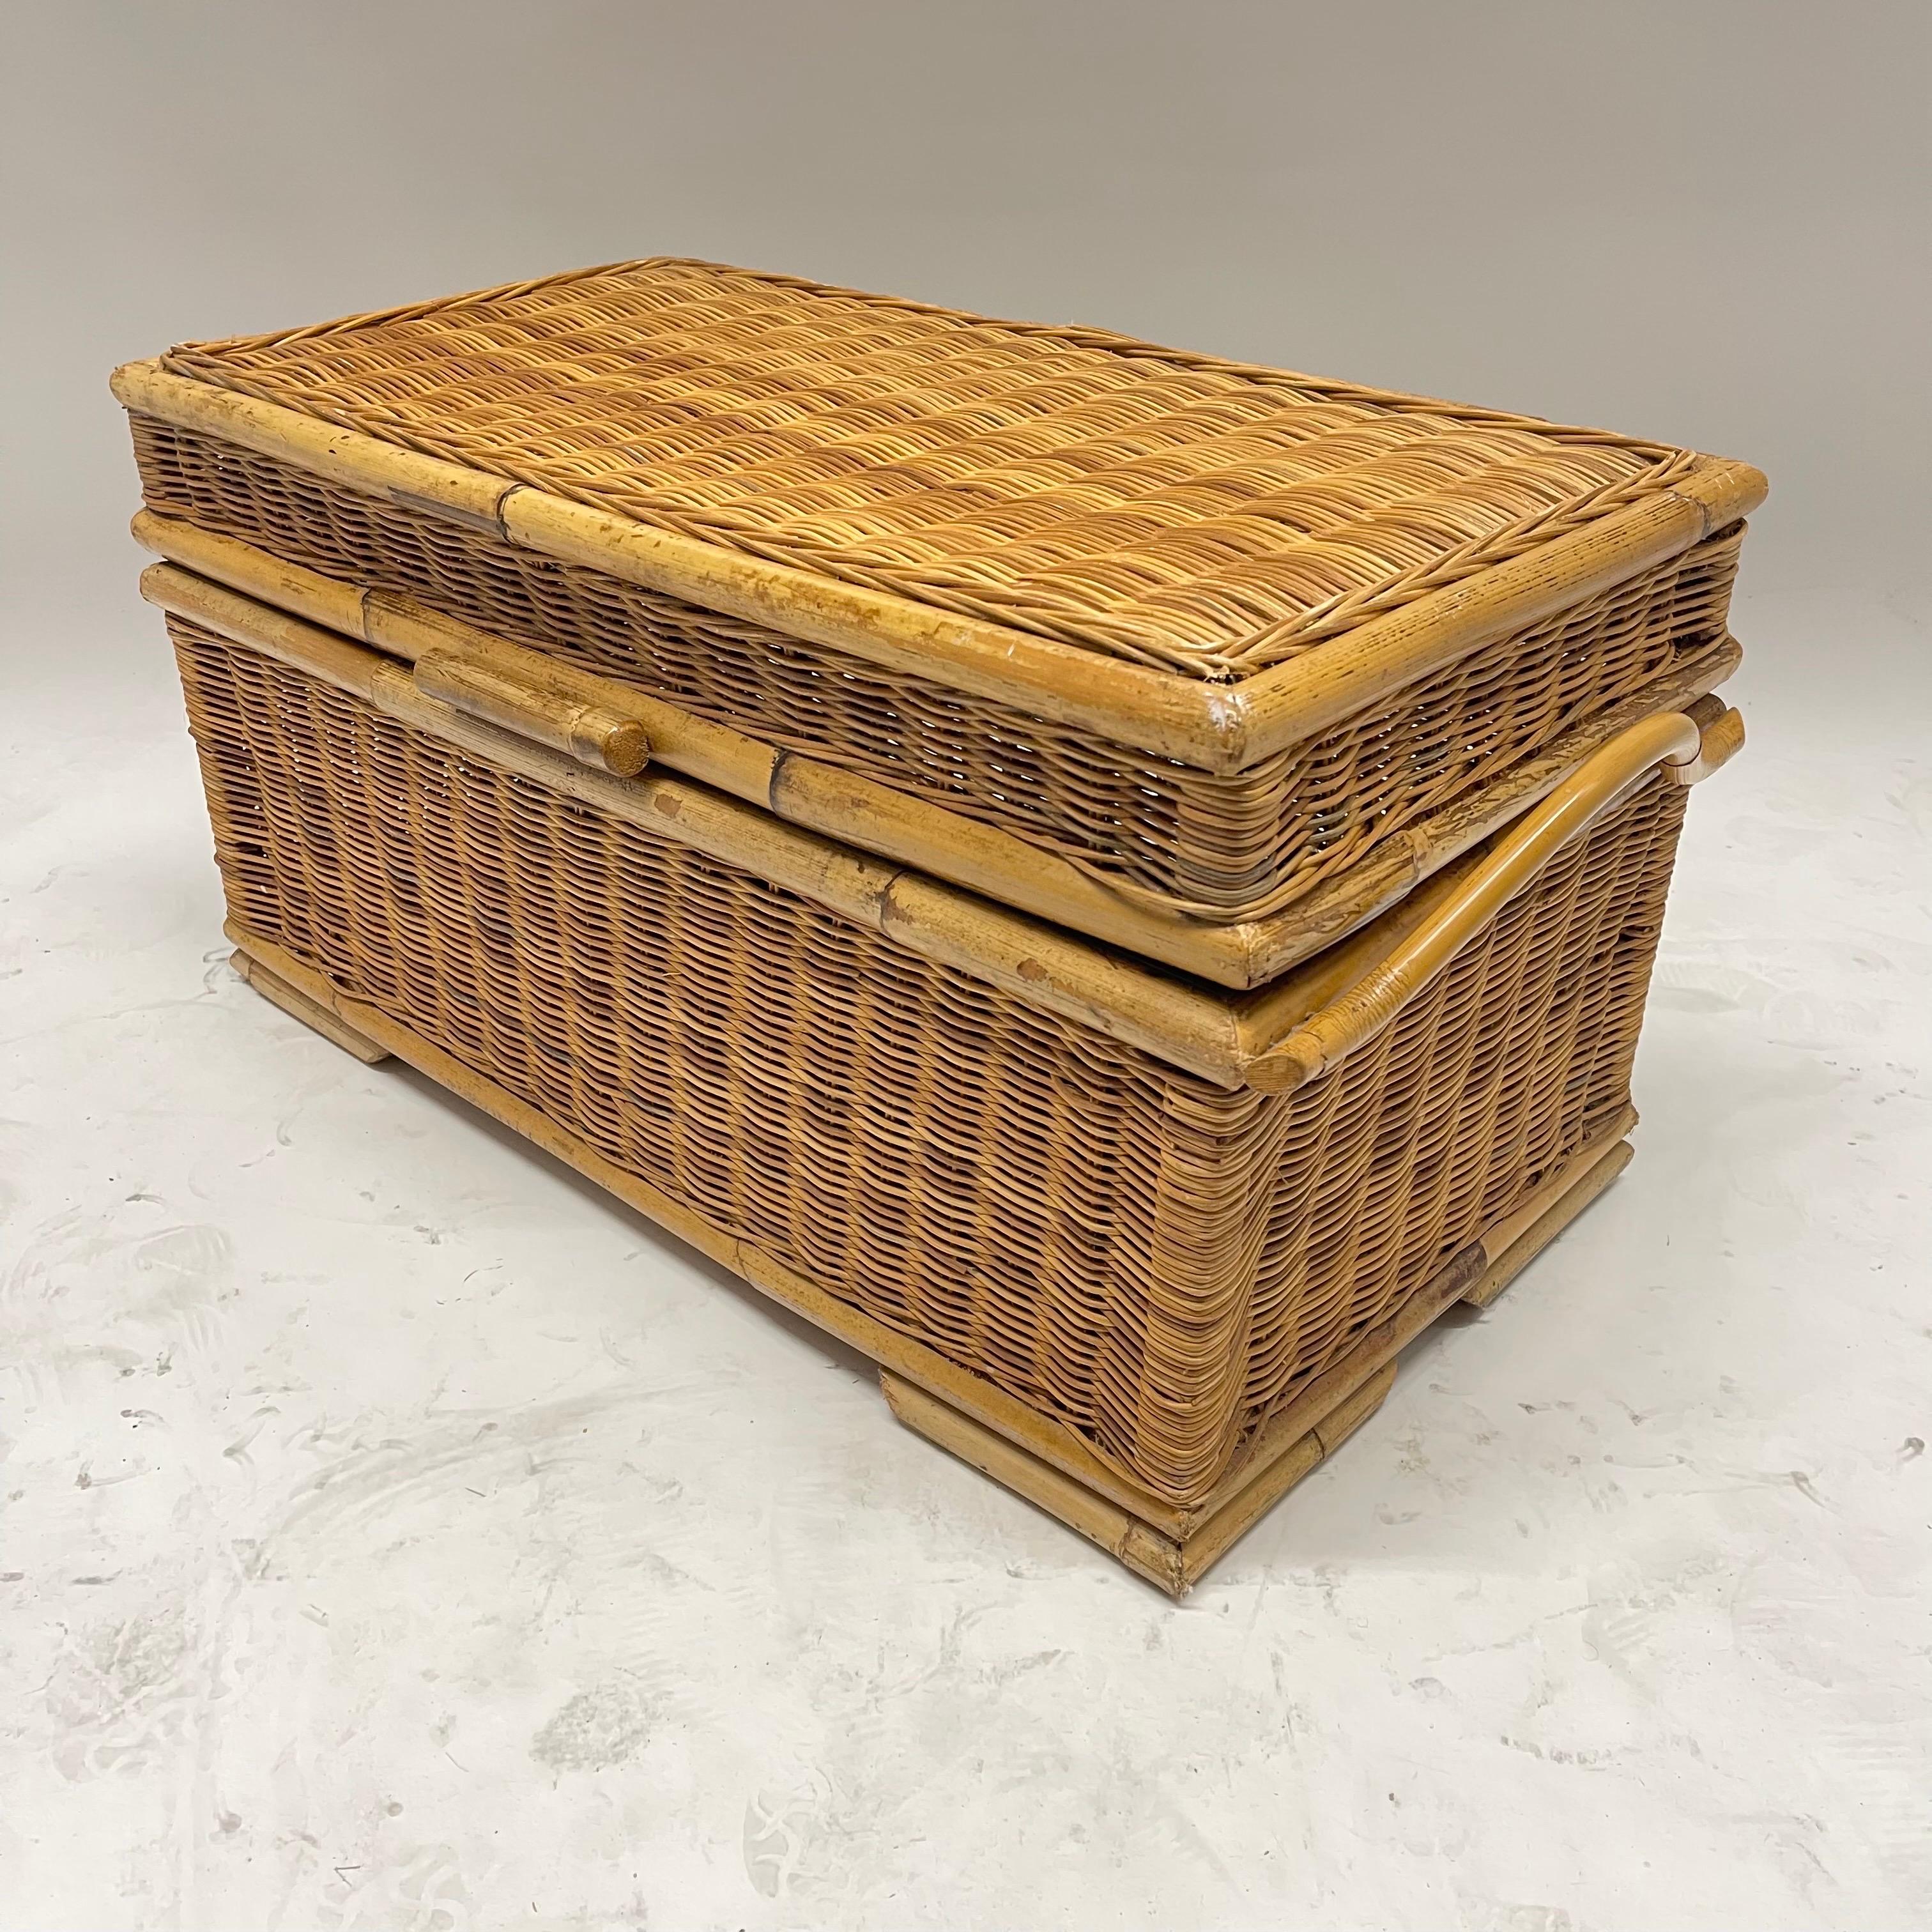 Mid century French Riviera trunk, blanket chest, toy chest, or large picnic basket. Rendered in hand woven wicker with bamboo bent rattan handles, feet, and frame. Made in France, circa 1970s.